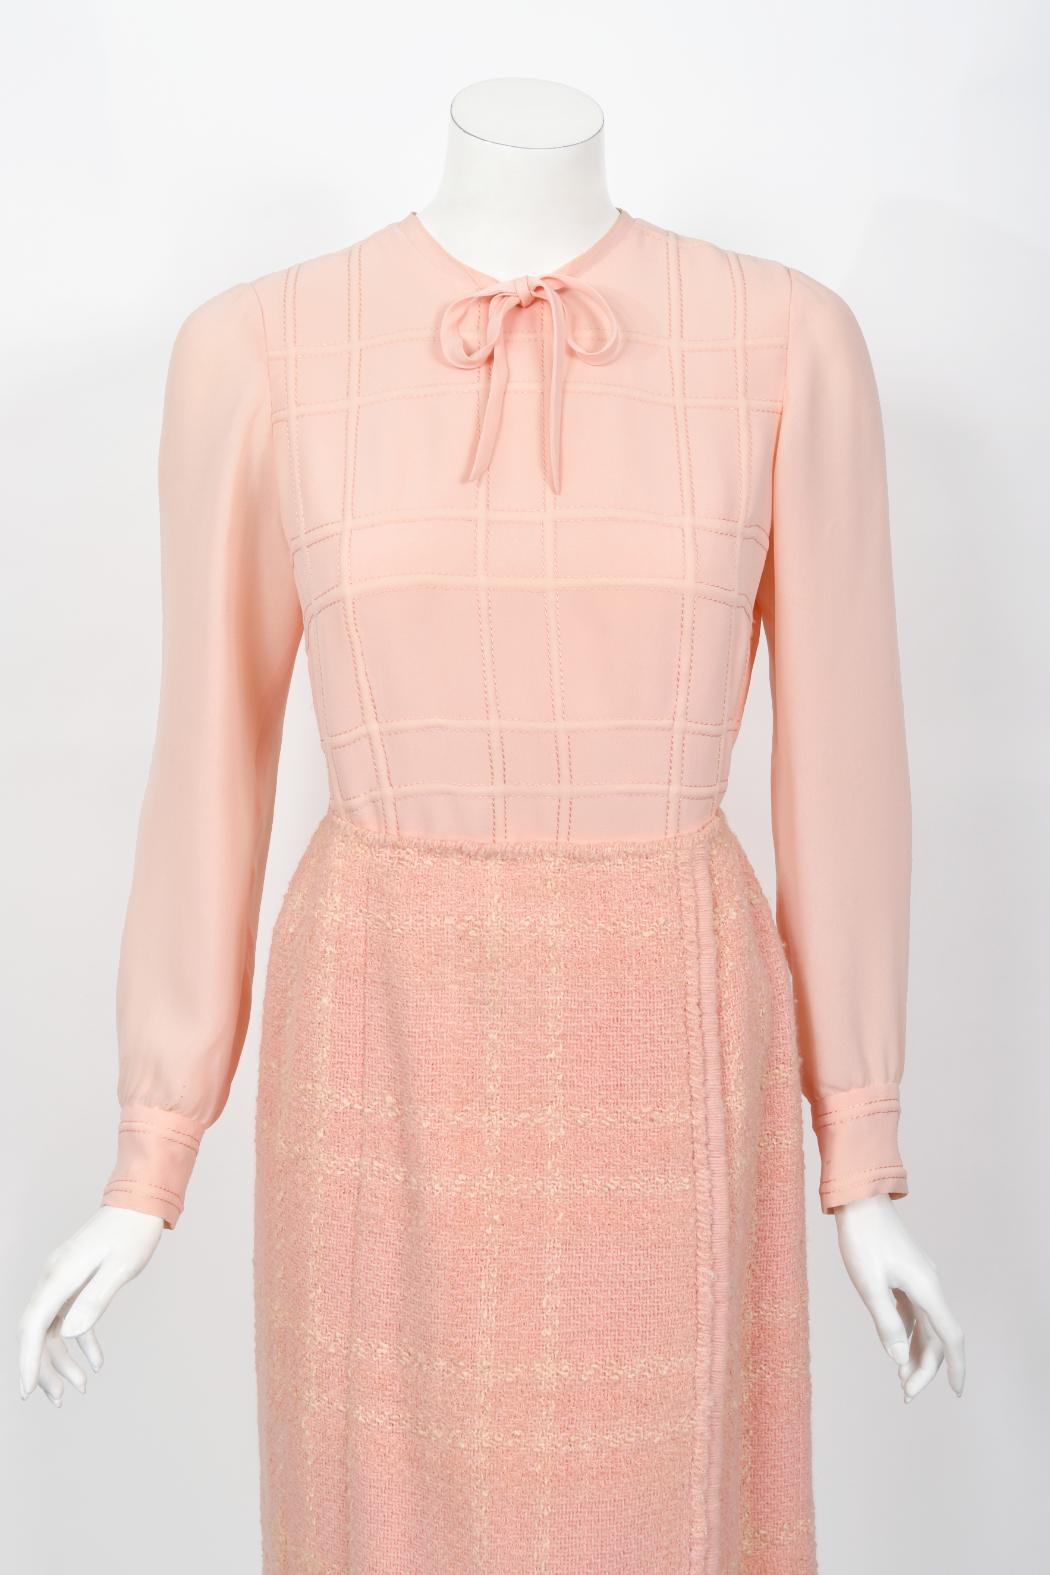 Vintage 1973 Chanel Haute Couture Documented Pink Wool Jacket Blouse Skirt Suit For Sale 11